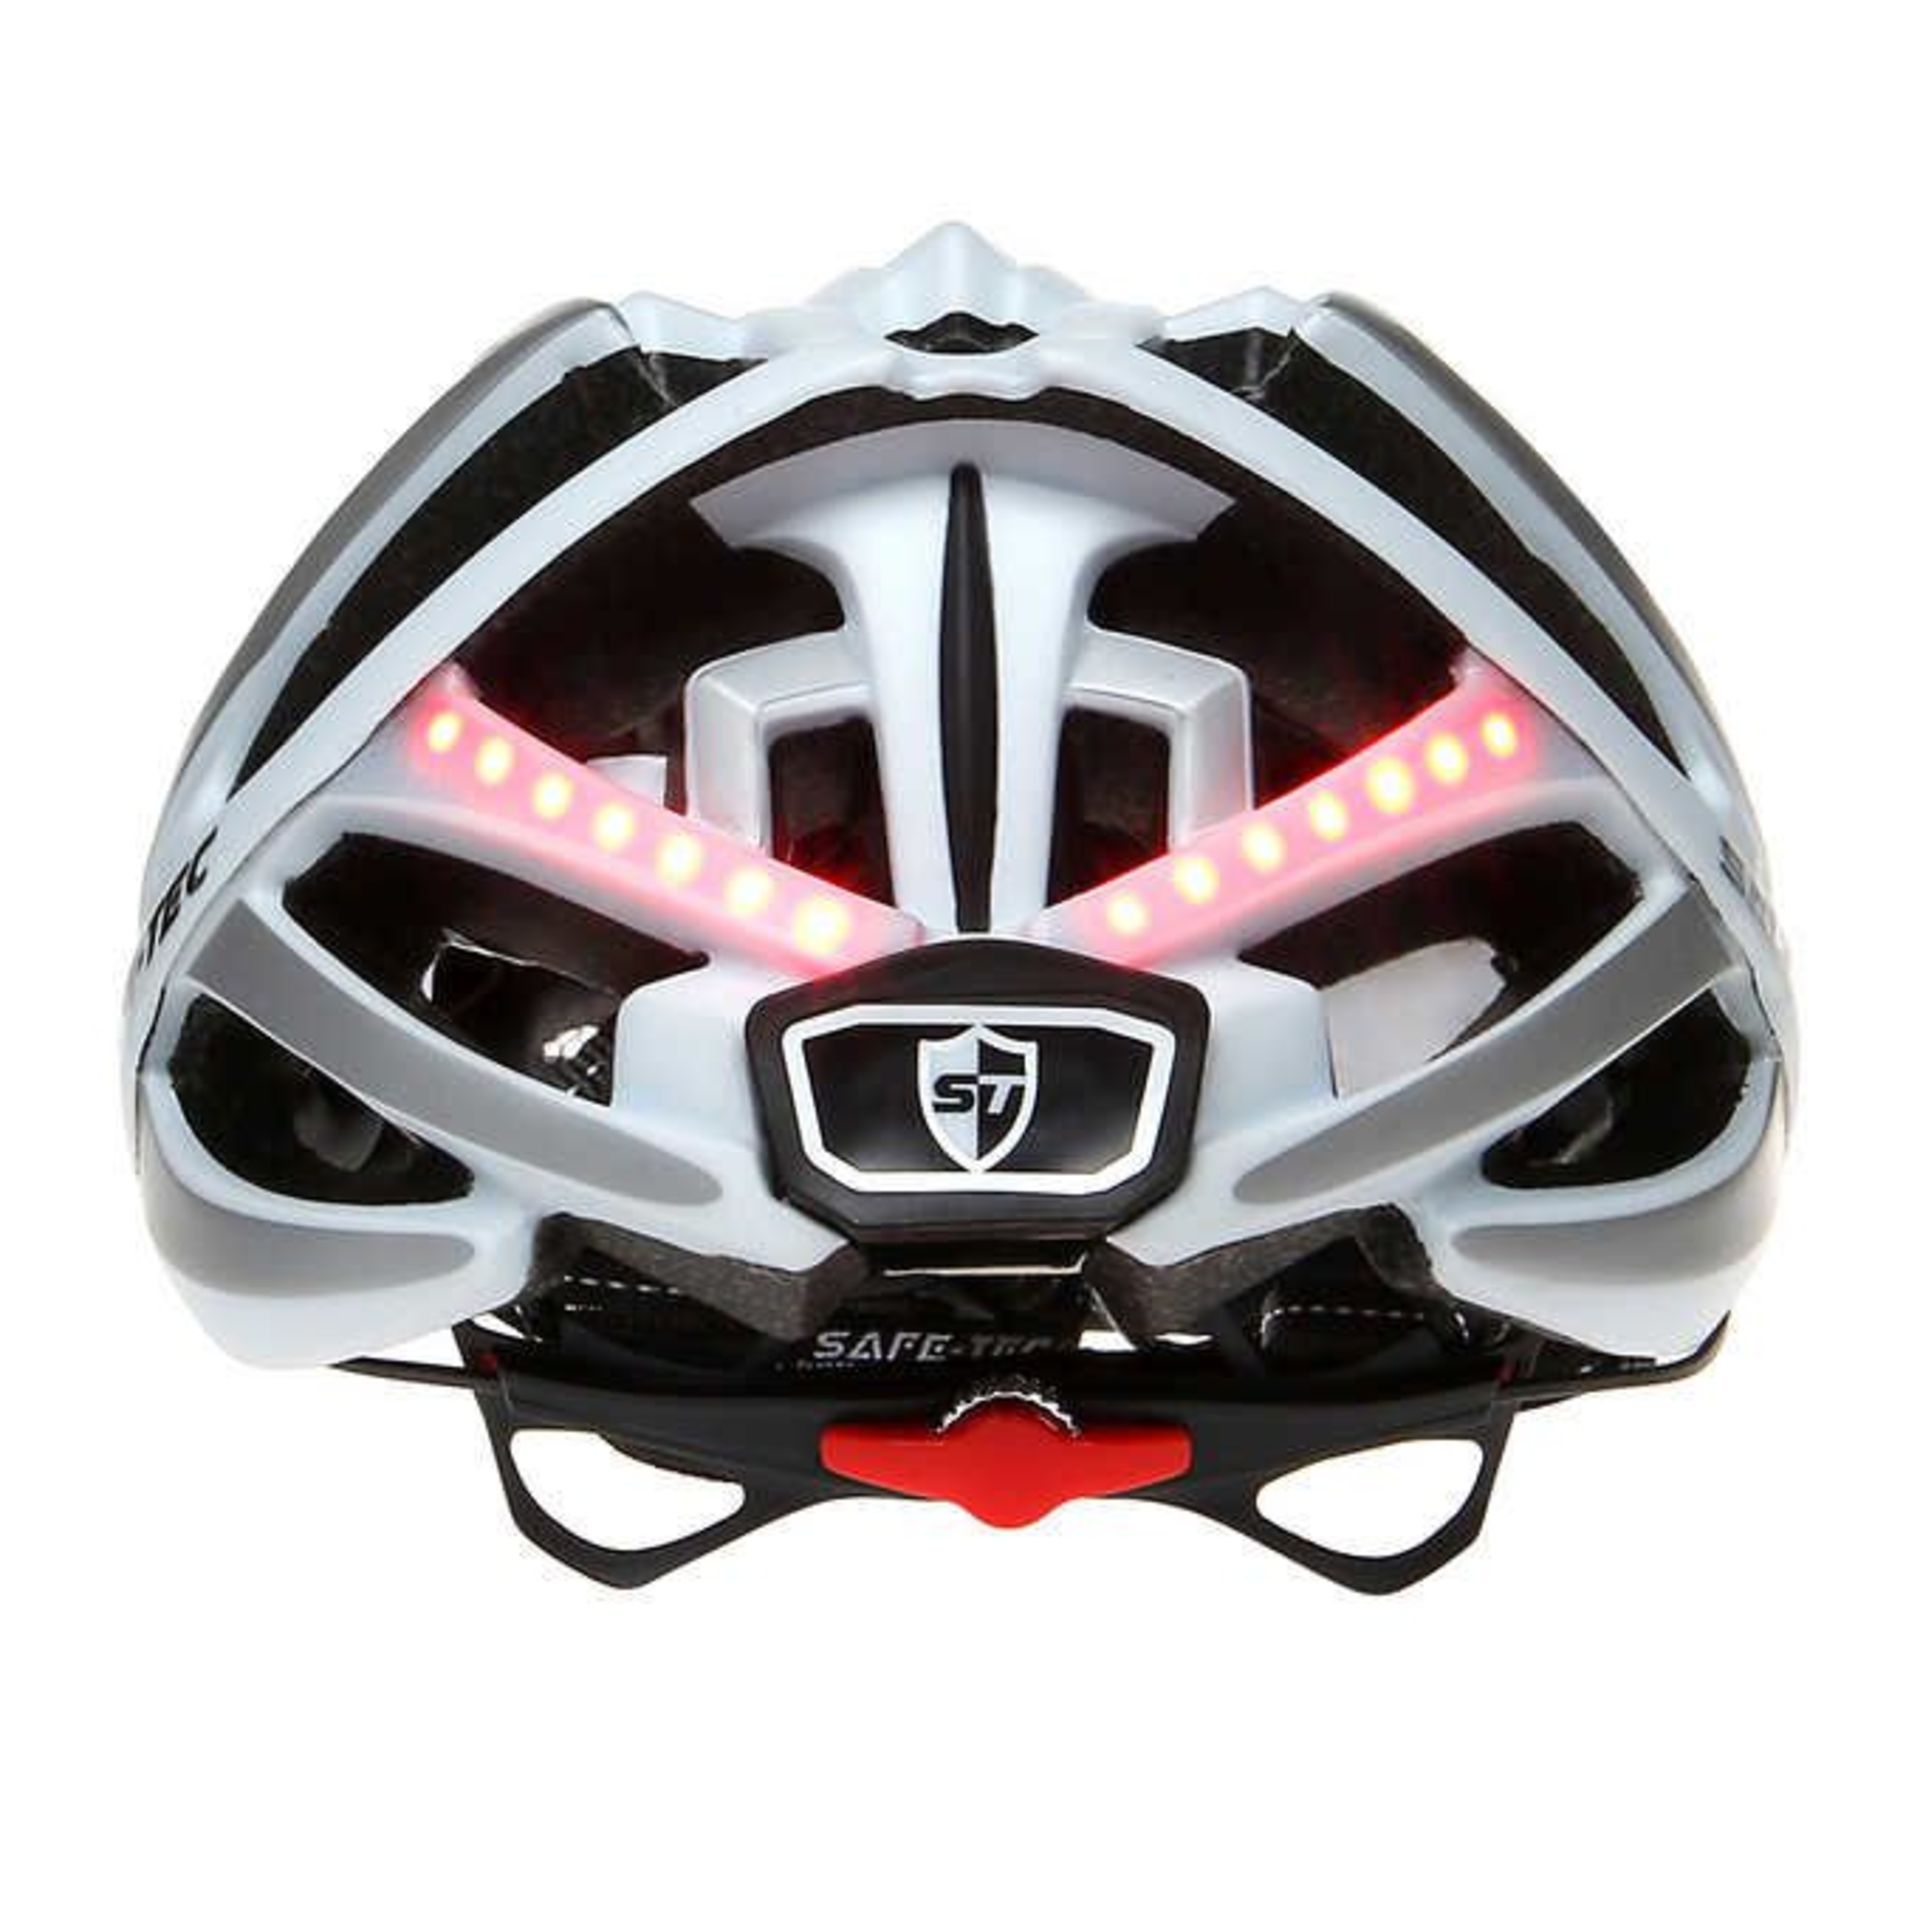 SAFE-TEC WHITE/SILVER BICYCLE HELMET (LARGE) C/W BLUETOOTH SPEAKERS & LIGHTS (NEW) (MSRP $150) - Image 5 of 8